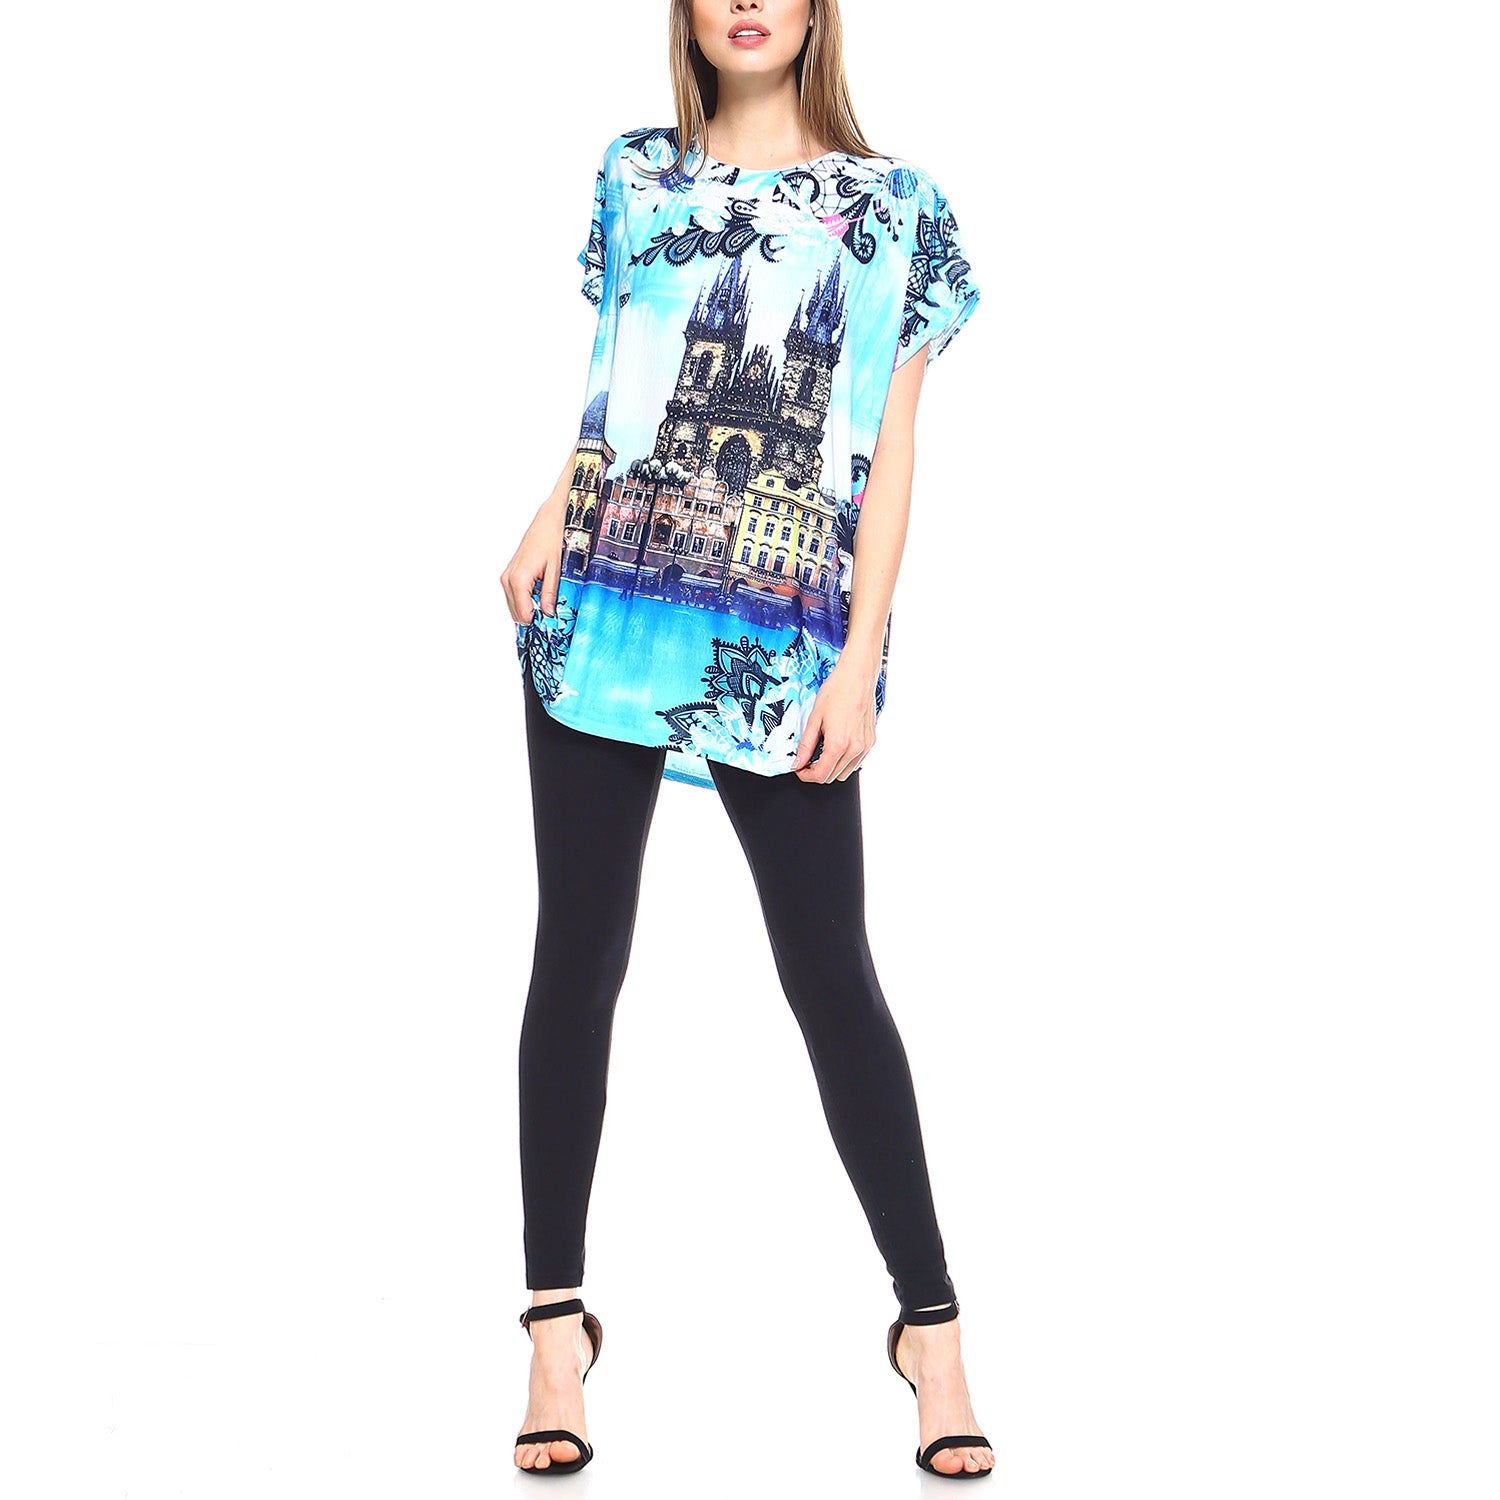 Fashionazzle Women's Casual Summer Short Sleeve Print Tunic Loose fit Top-4